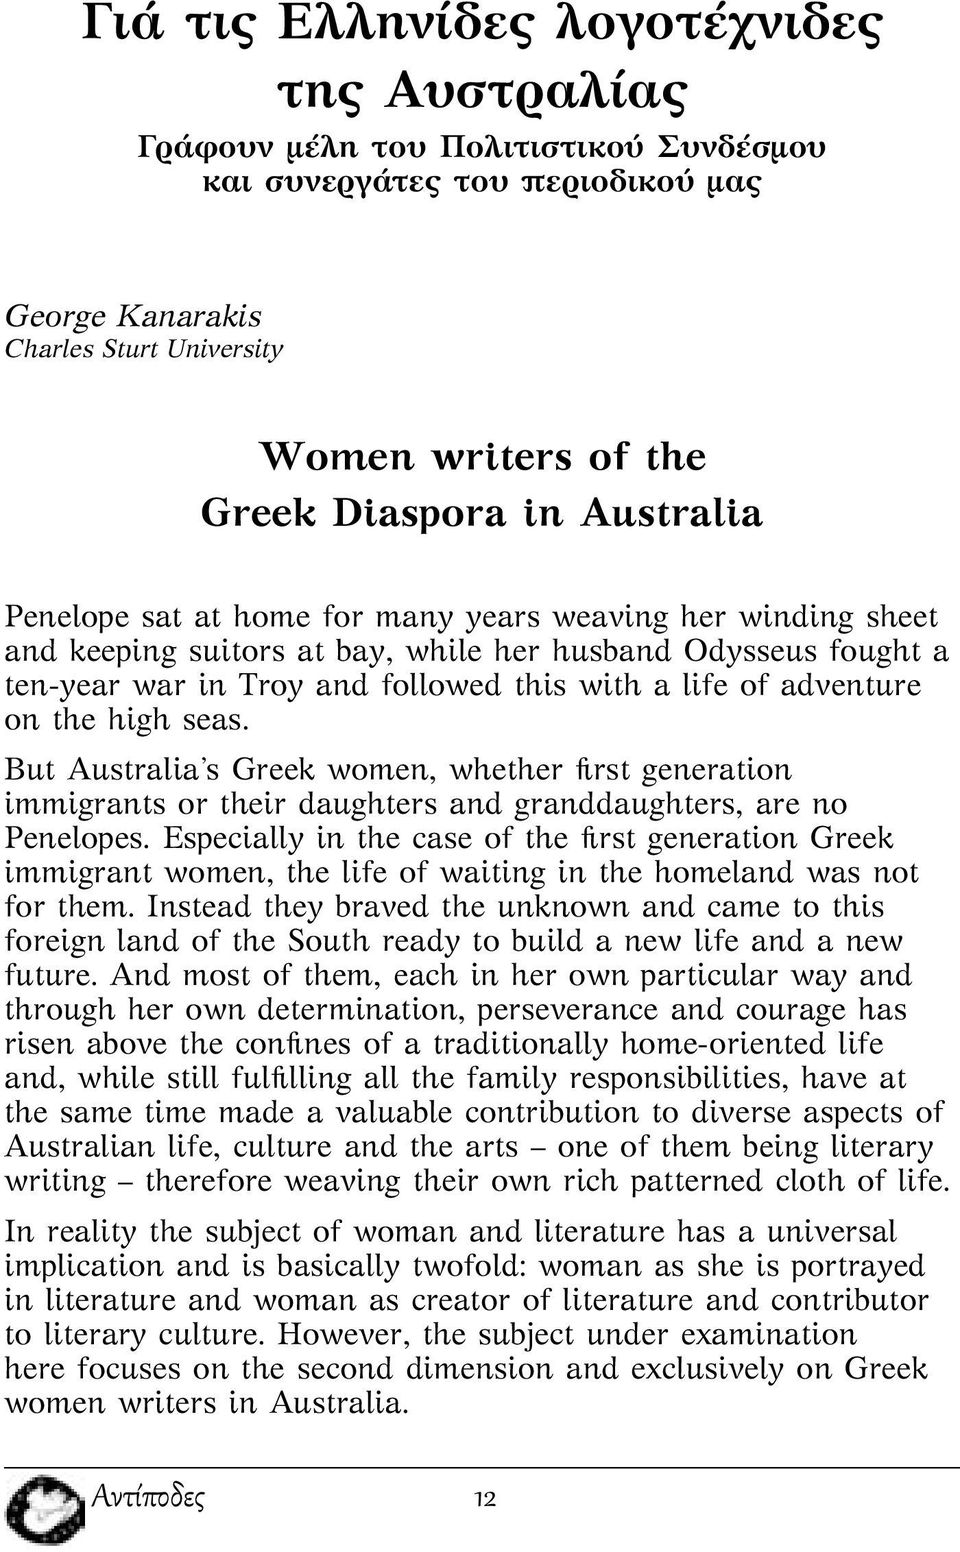 adventure on the high seas. But Australia s Greek women, whether first generation immigrants or their daughters and granddaughters, are no Penelopes.